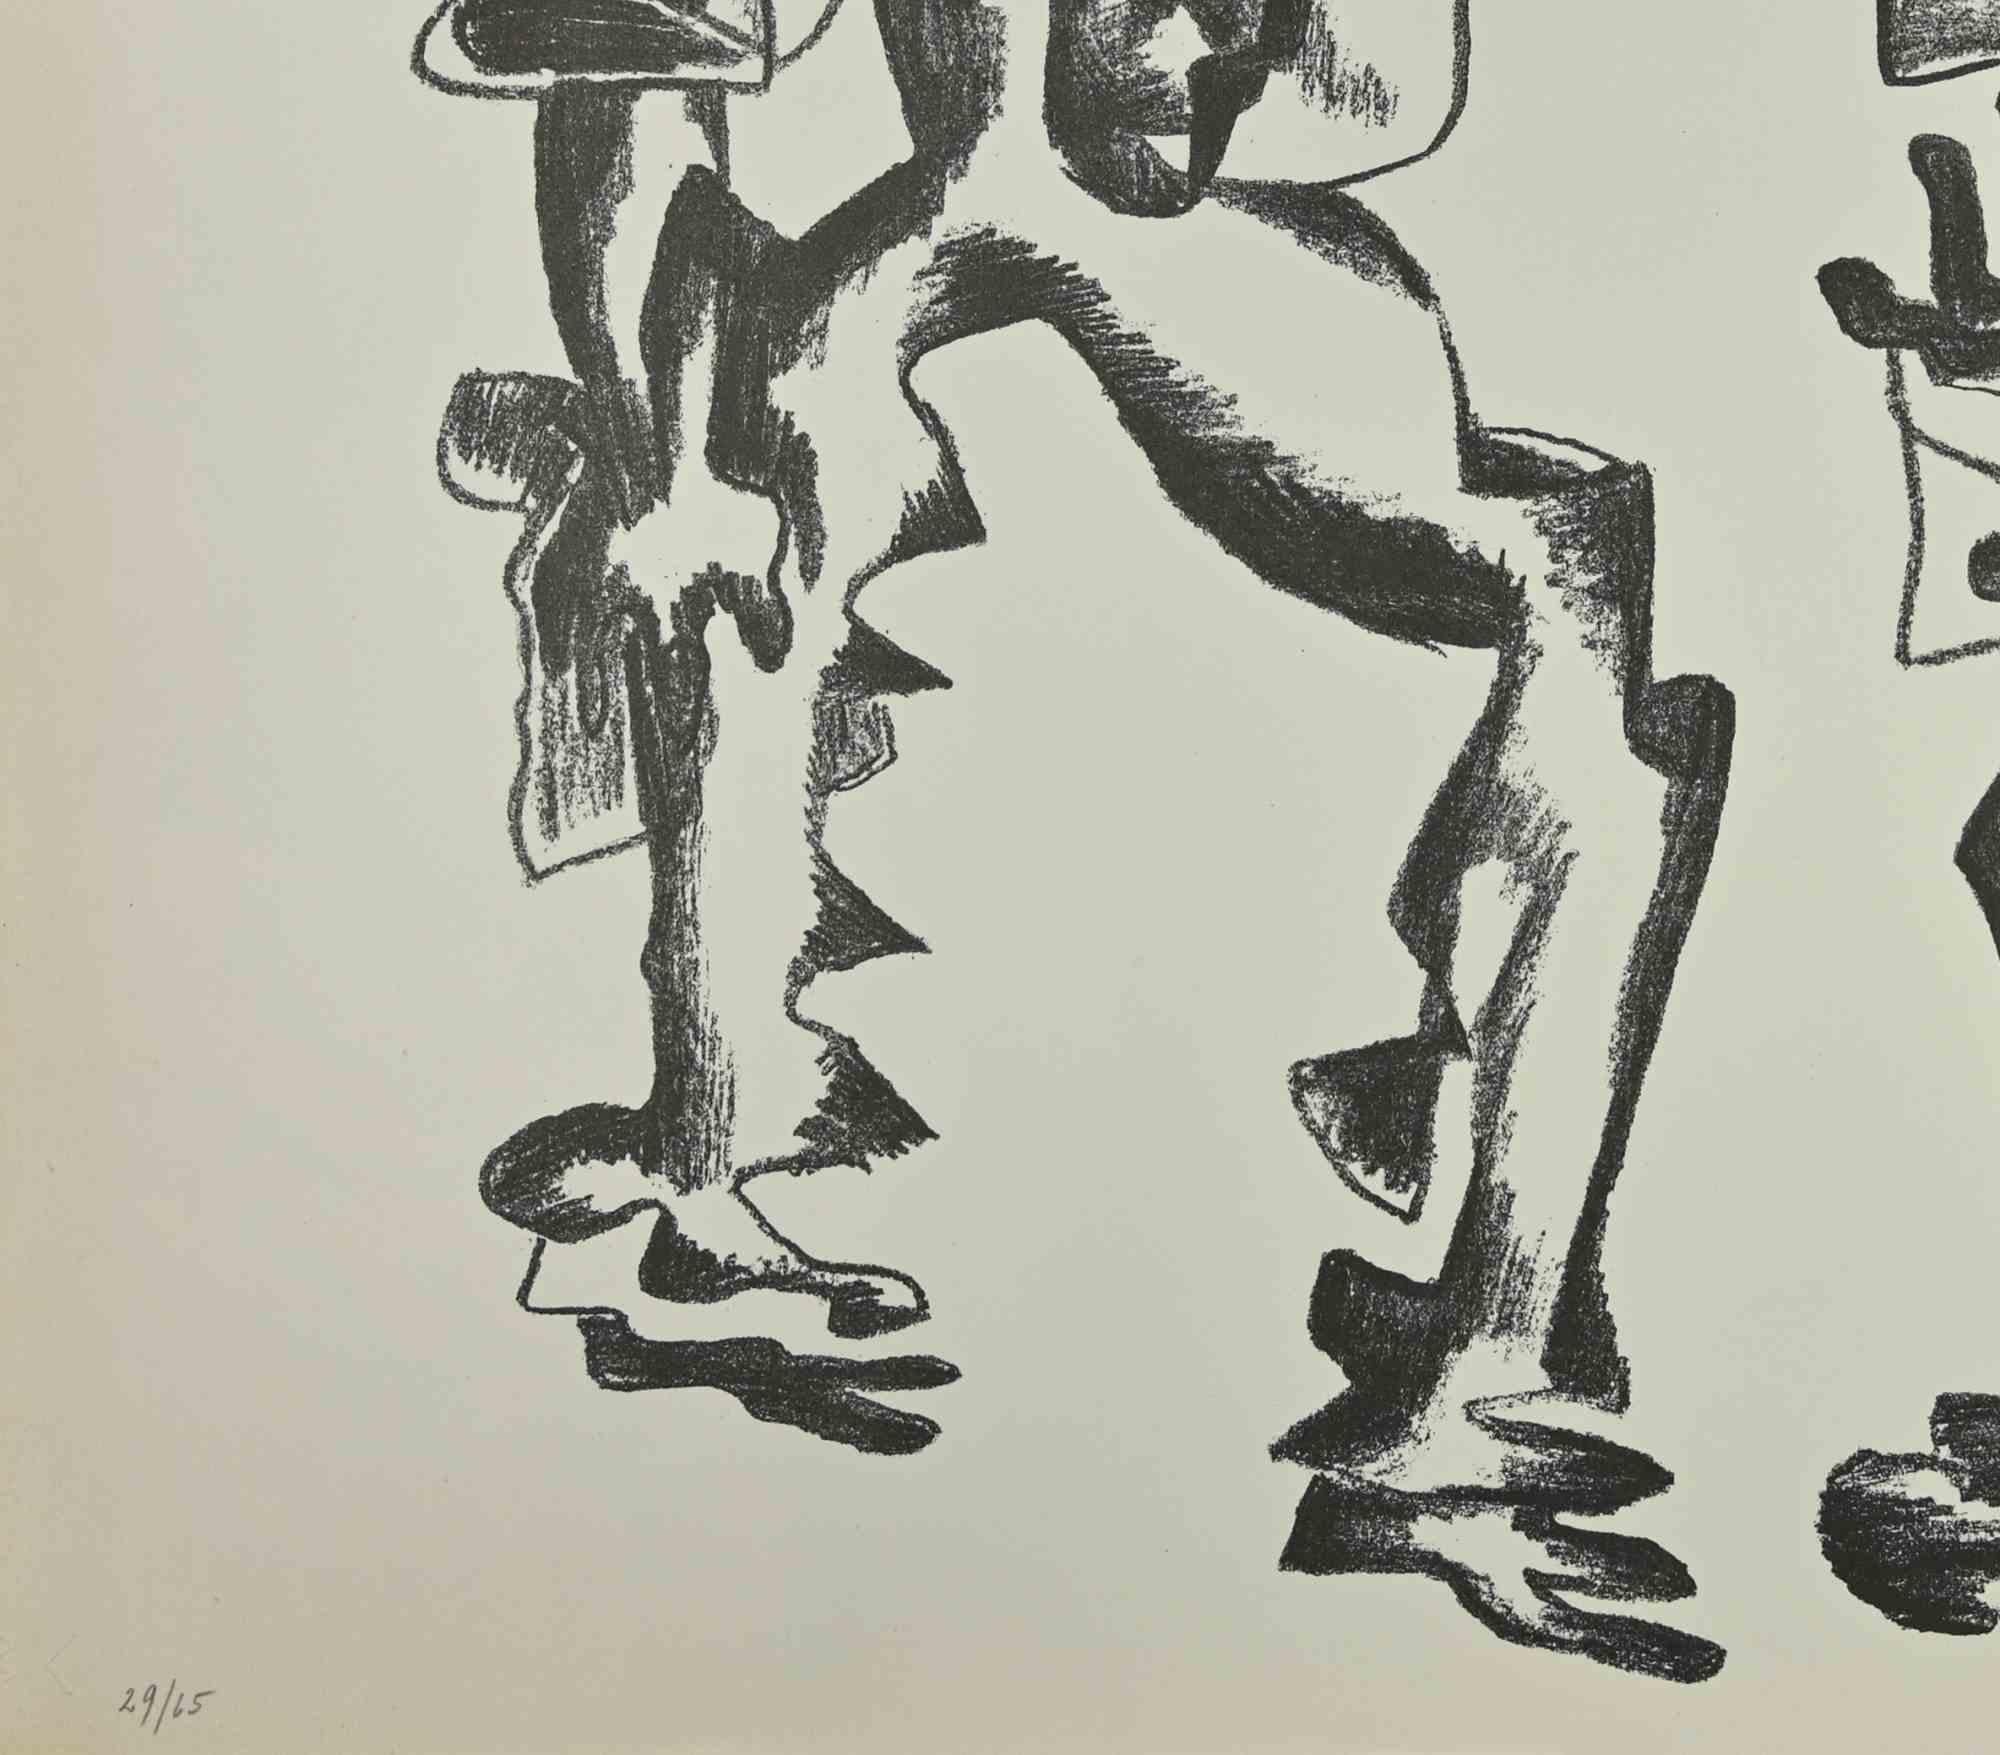 Untitled is an artwork realized by Ossip Zadkine in the mid-20th Century. 

Lithograph, 50 x 65 cm, no frame. 

Numbering (copy 29 / 65) in pencil in the front.

Blind stamp Atelier Ossip Zadkine. 

Notes: Ketterer Editions, Munich. 

Very good